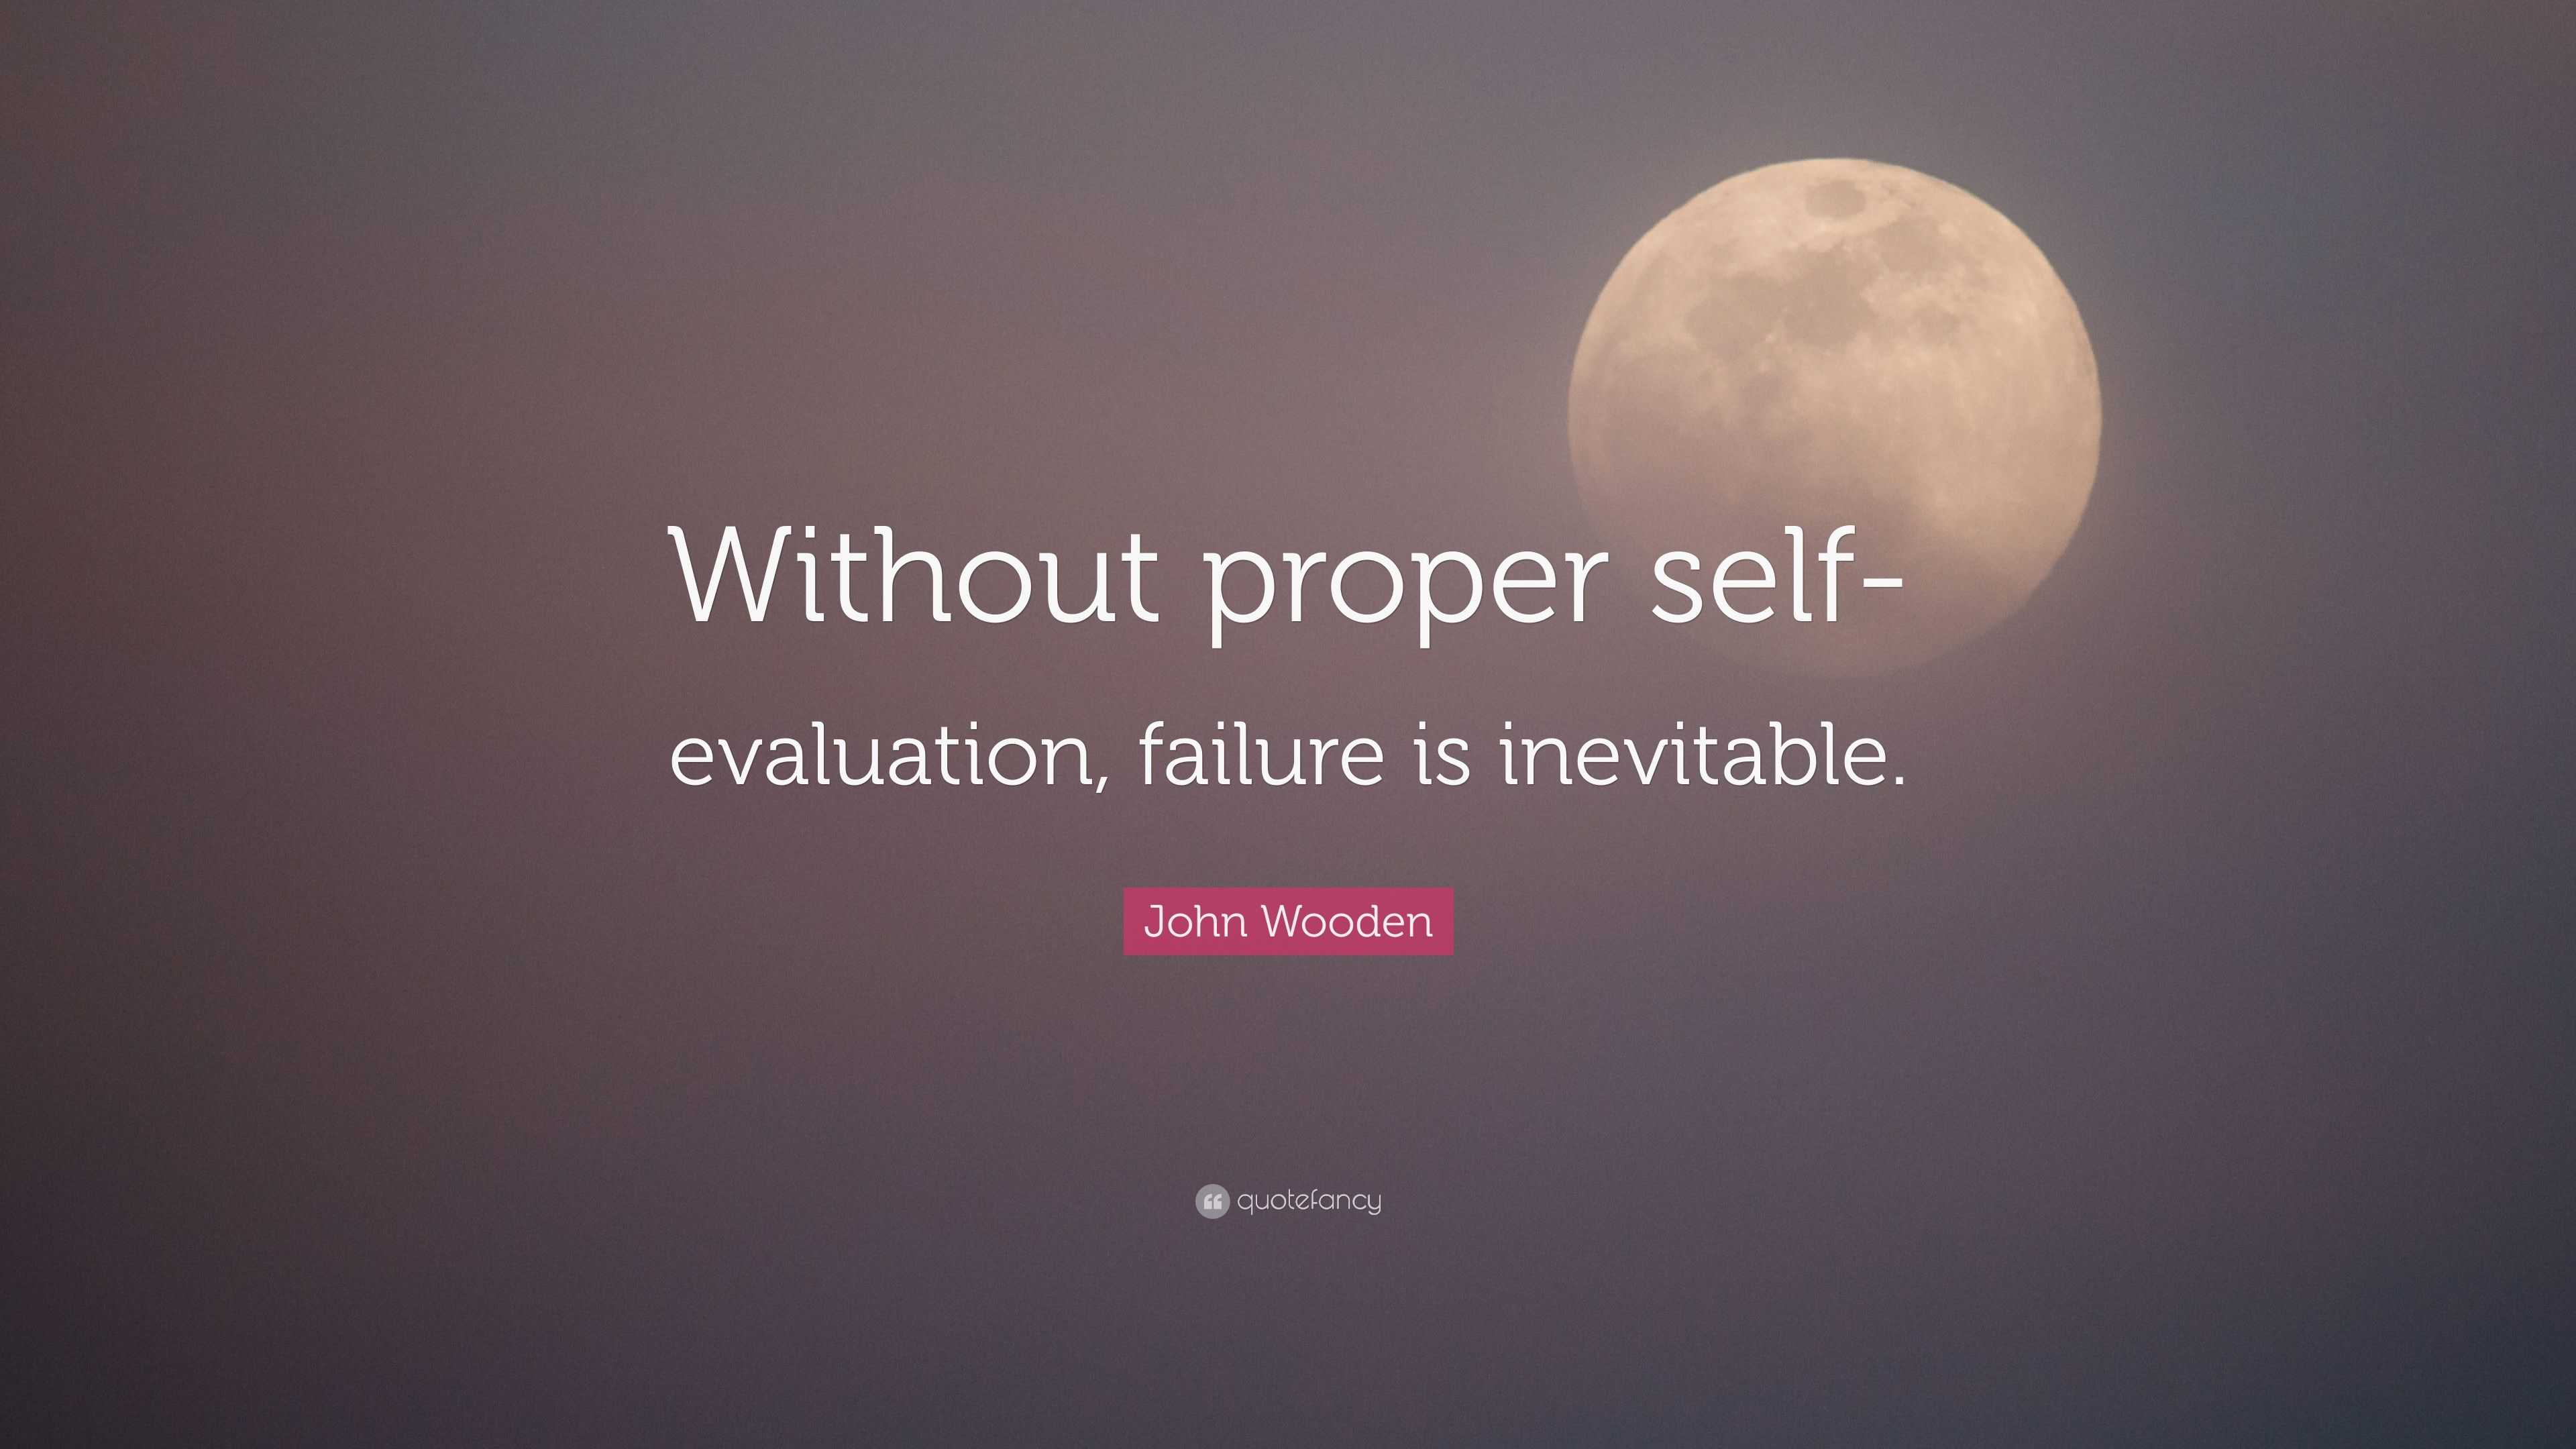 John Wooden Quote: “Without proper self-evaluation, failure is